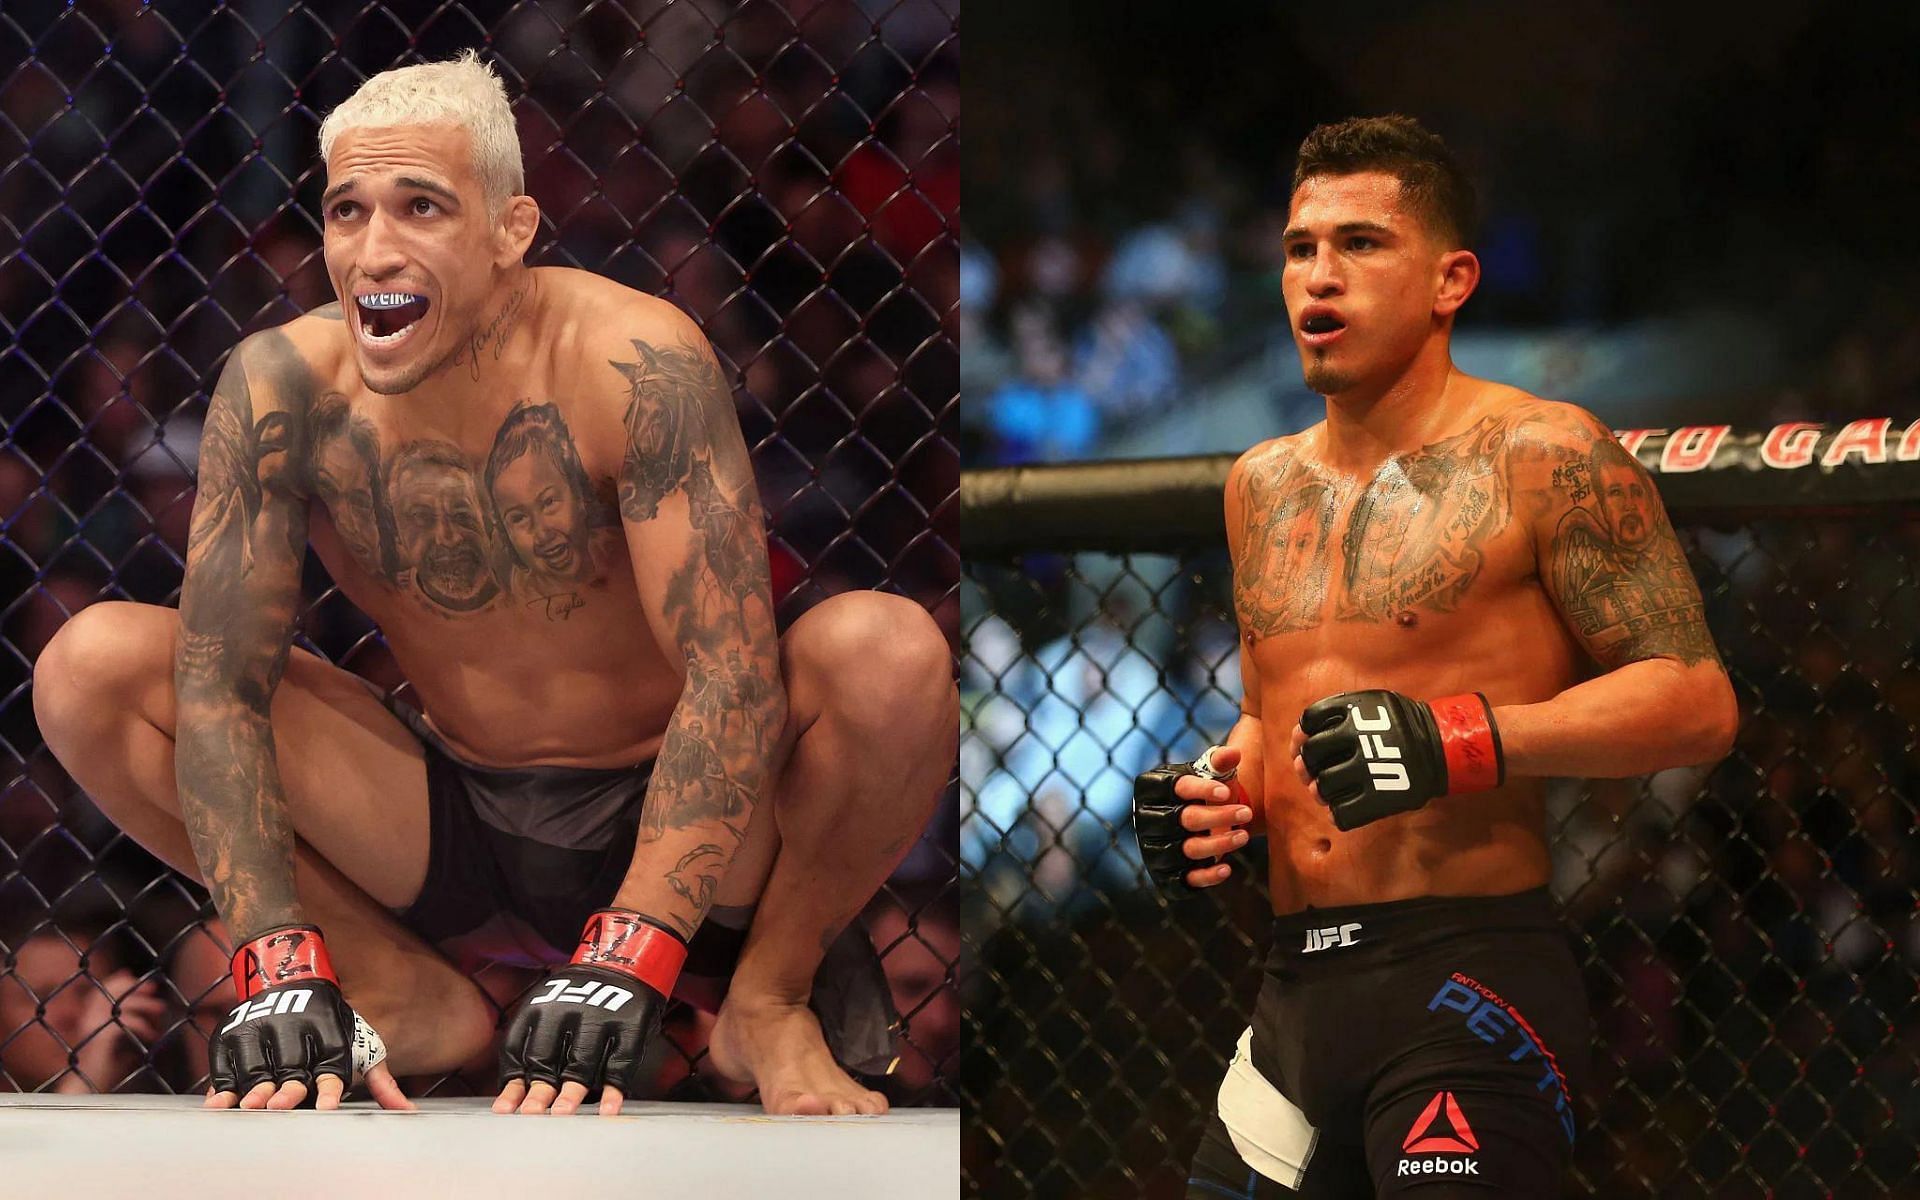 Charles Oliveira (Left) and Anthony Pettis (Right) (Images courtesy of Getty)